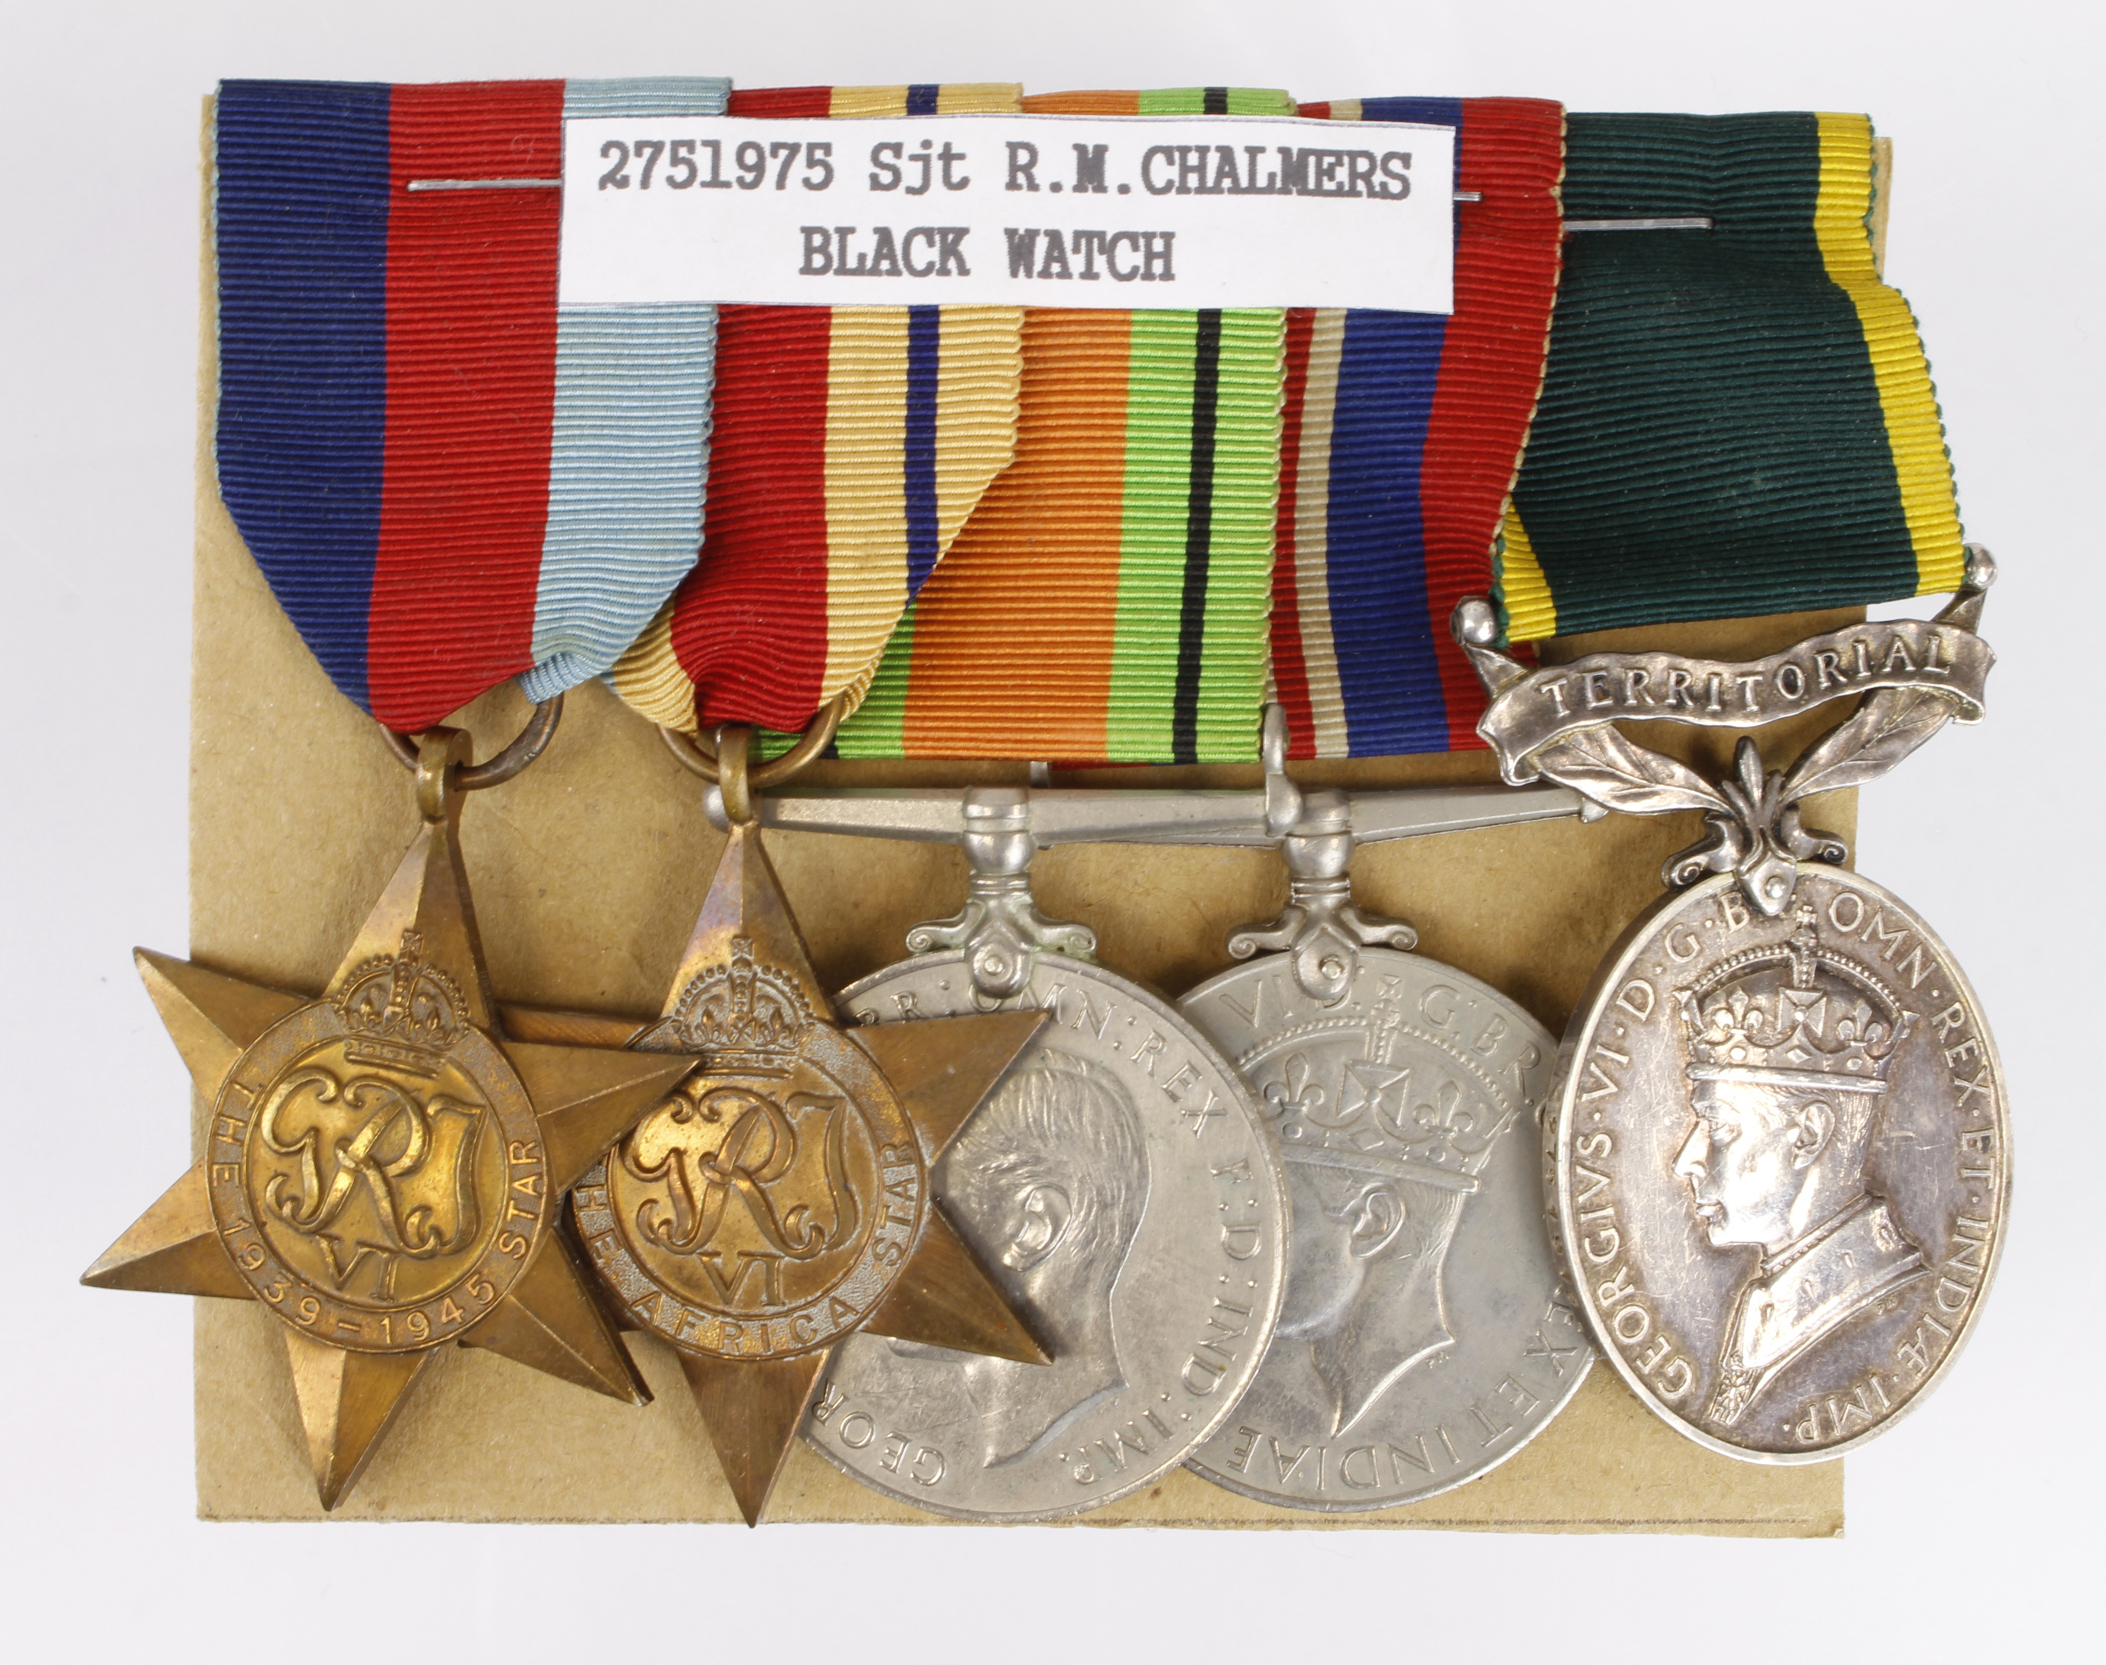 Group to 2751975 Sjt R M Chalmers, Black Watch. 1939-45 Star, Africa Star, Defence & War Medals,